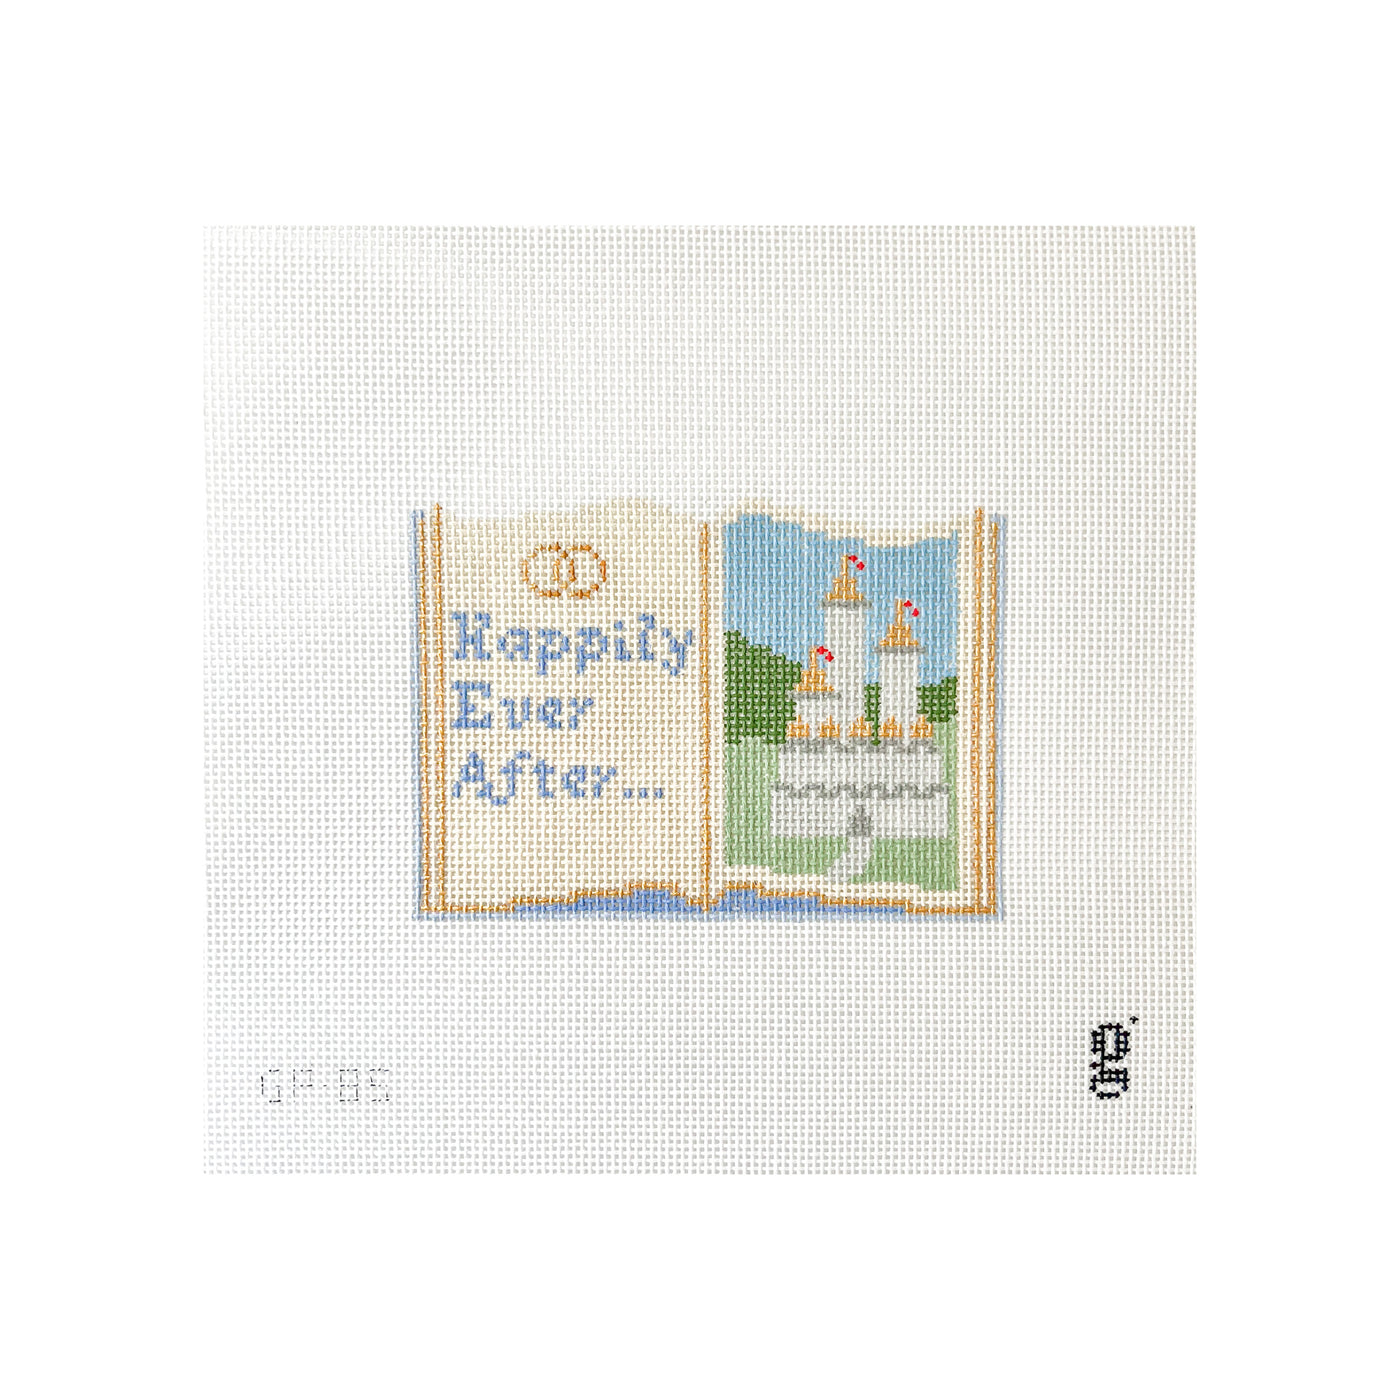 White needlepoint canvas with painted design of an open storybook. A fairytale castle is on the right page while the words "Happily Ever After" beneath interlocking wedding rings is on the left page